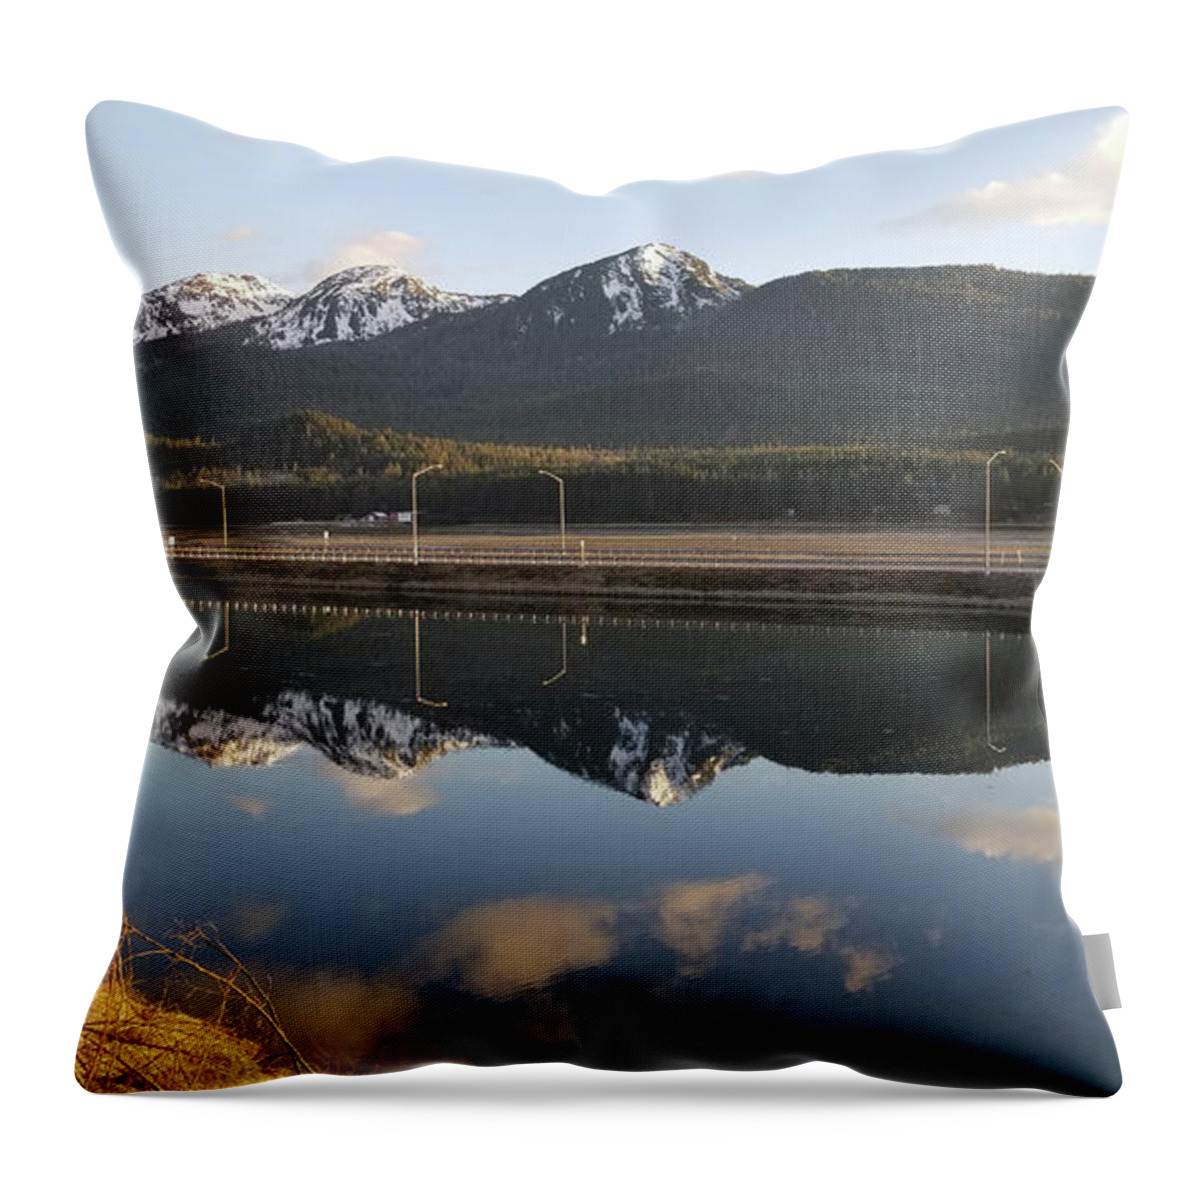 #alaska #juneau #ak #cruise #tours #vacation #peaceful #reflection #twinlakes #egandrive #douglas #capitalcity #clouds #evening #dusk Throw Pillow featuring the photograph Douglas, Reflected by Charles Vice